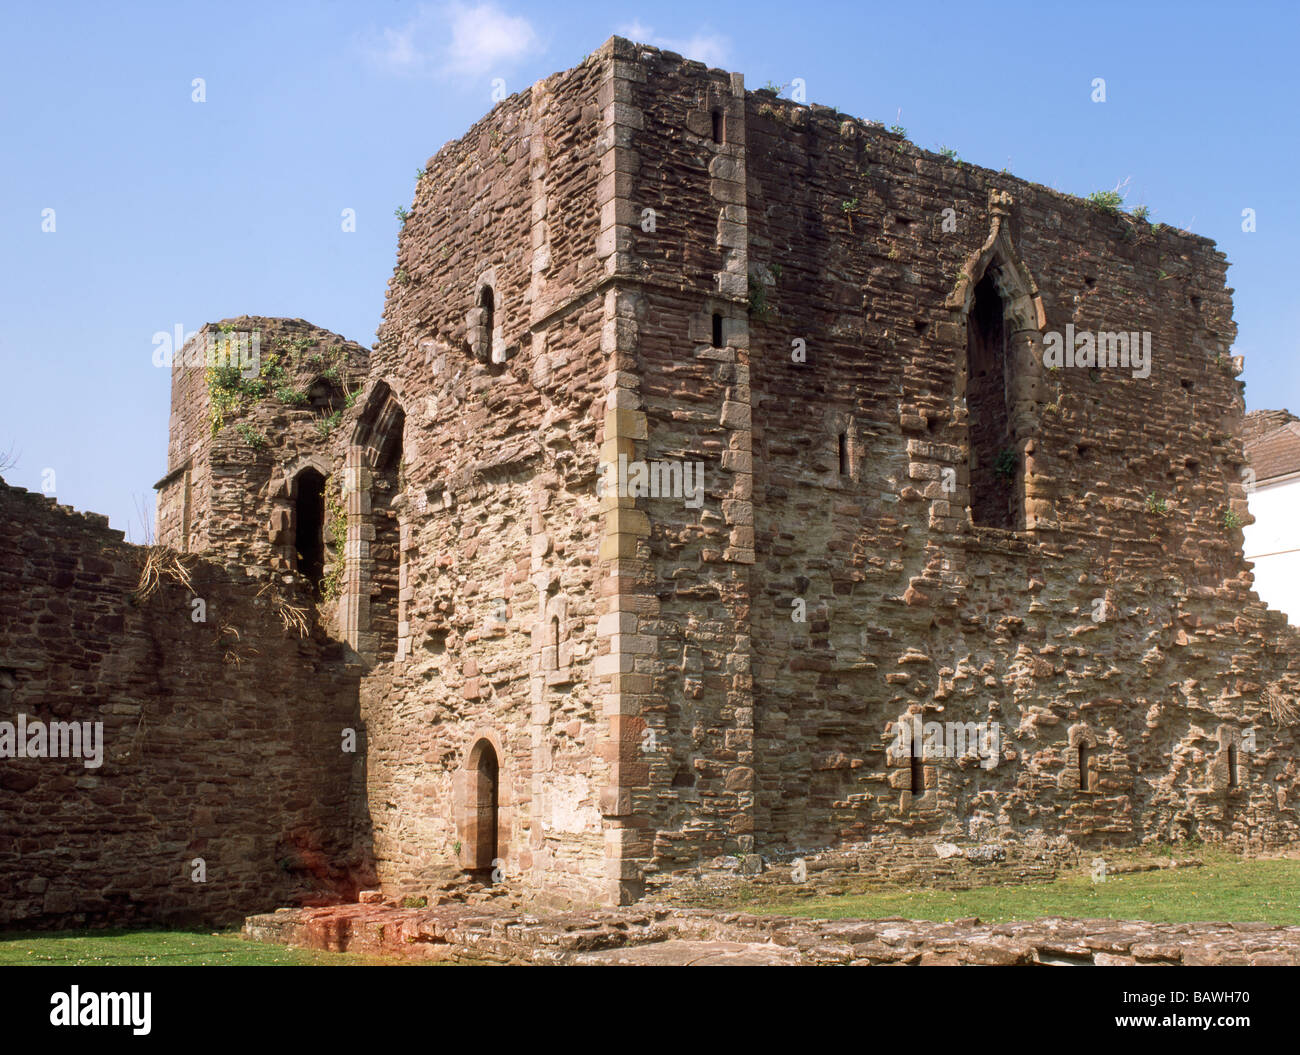 Wales Gwent Monmouth castle Stock Photo